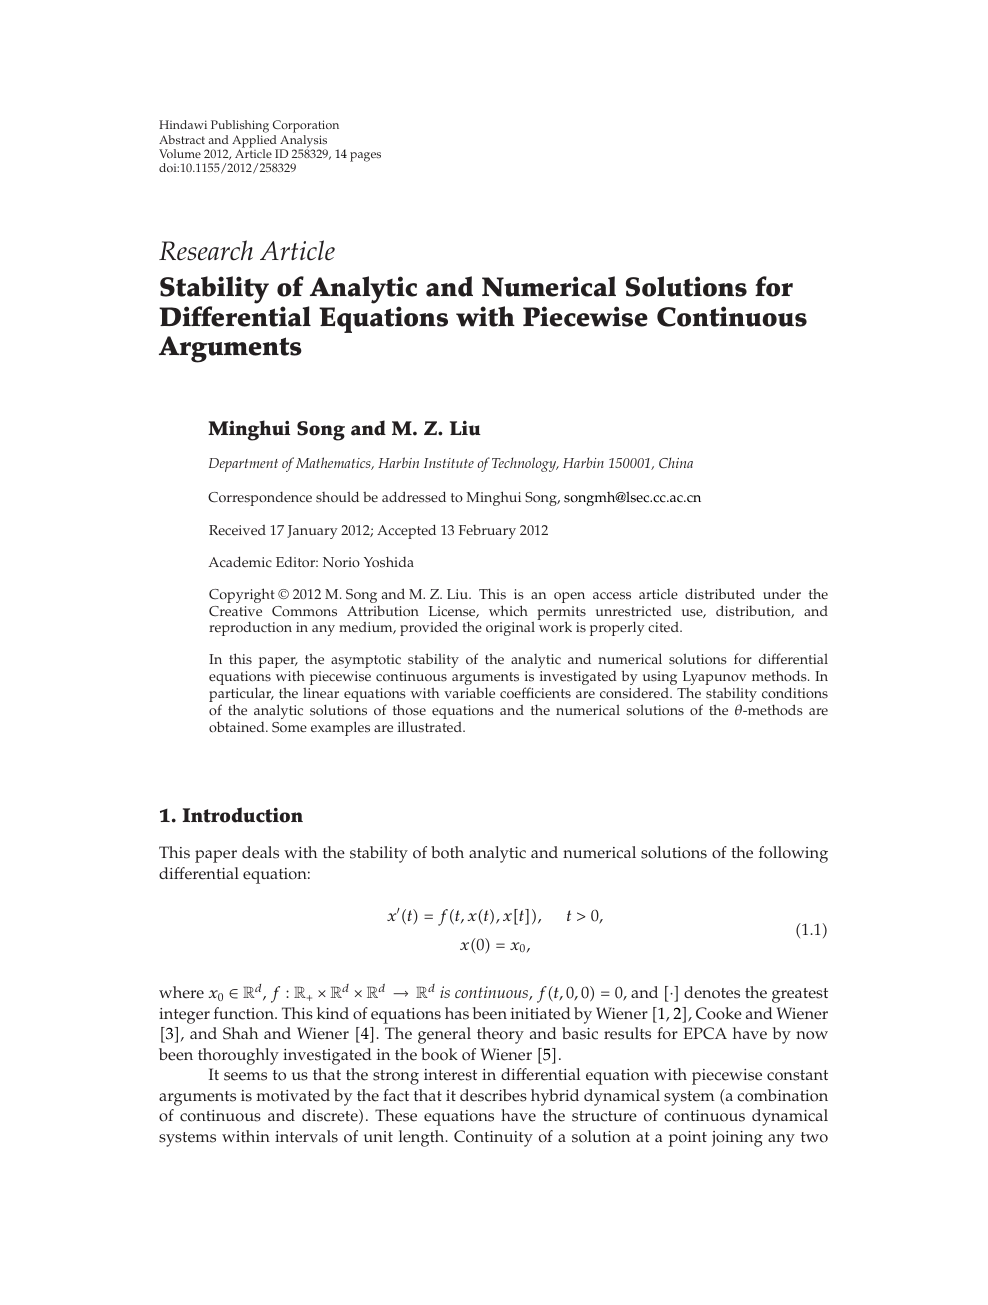 Stability Of Analytic And Numerical Solutions For Differential Equations With Piecewise Continuous Arguments Topic Of Research Paper In Mathematics Download Scholarly Article Pdf And Read For Free On Cyberleninka Open Science